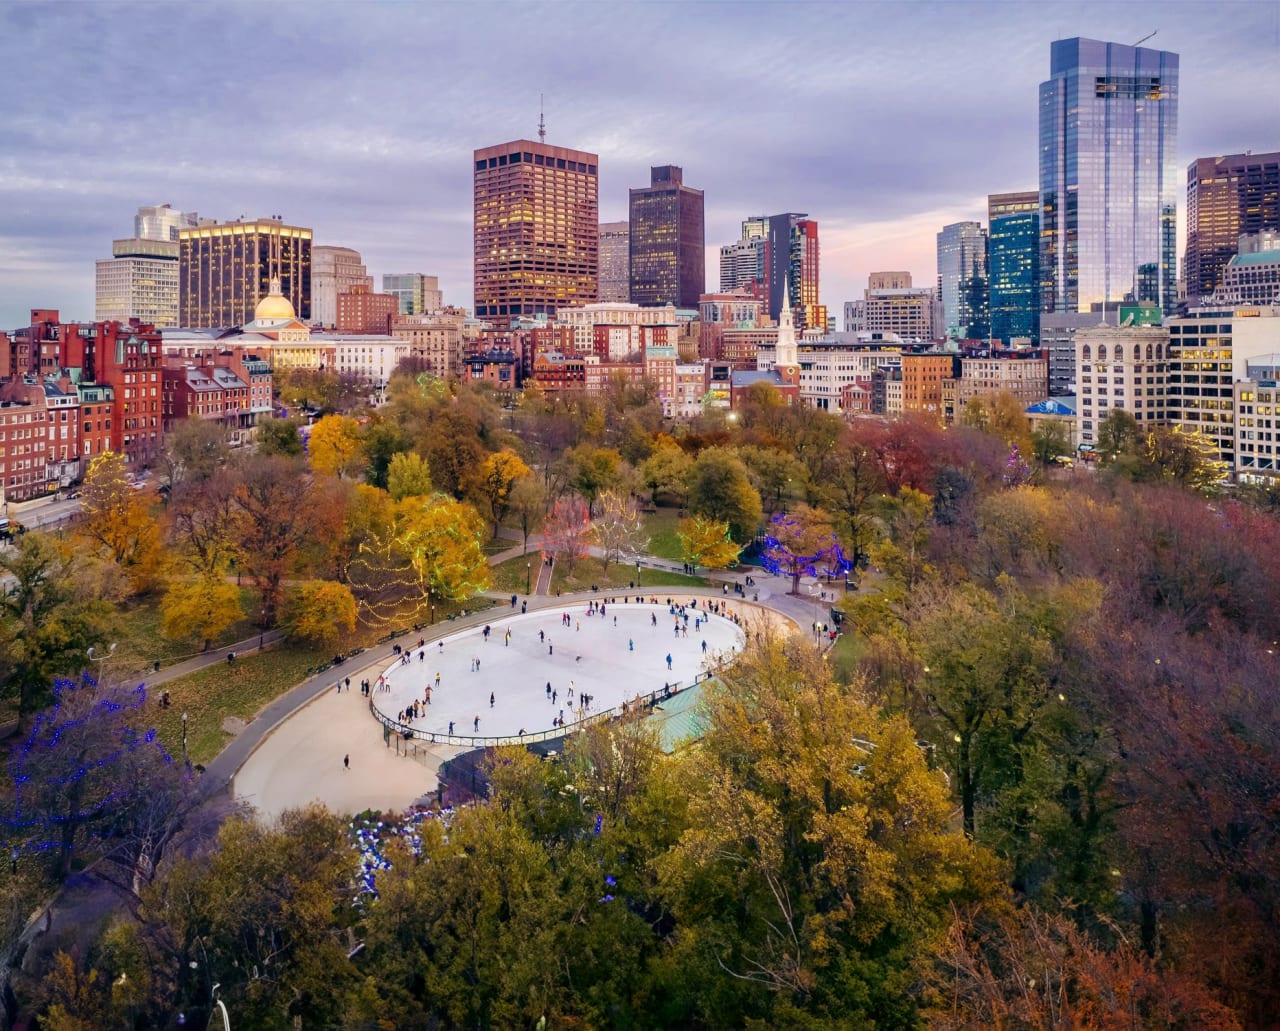 2023's Best Cities for Ice Skating - LawnStarter ranking